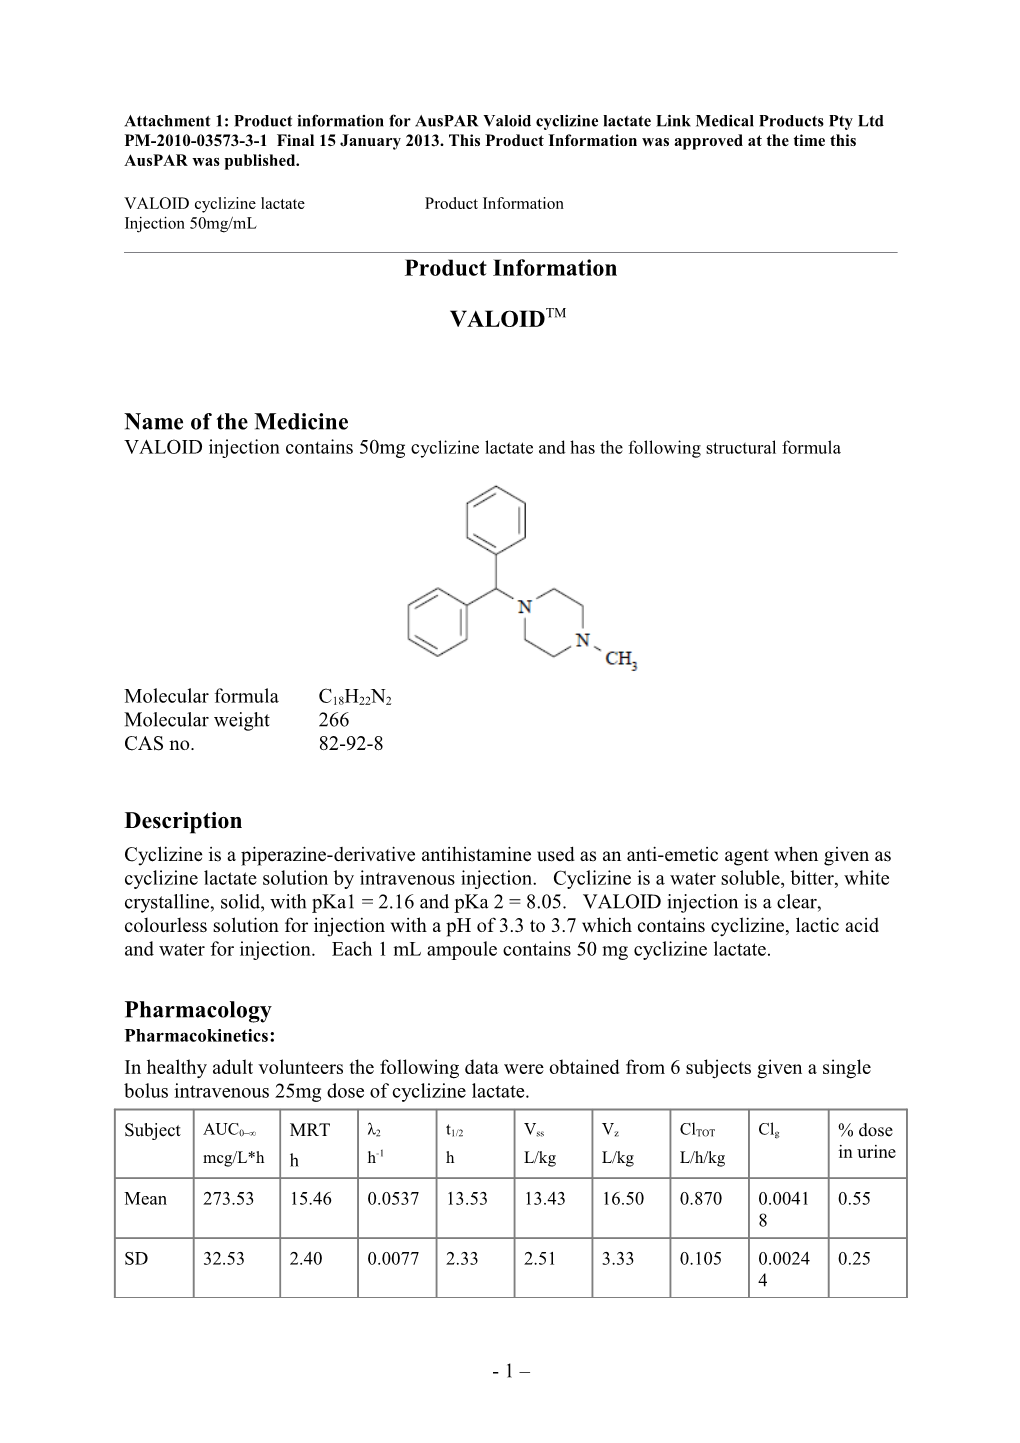 Attachment 1: Product Information for Auspar Valoid Cyclizine Lactate Link Medical Products